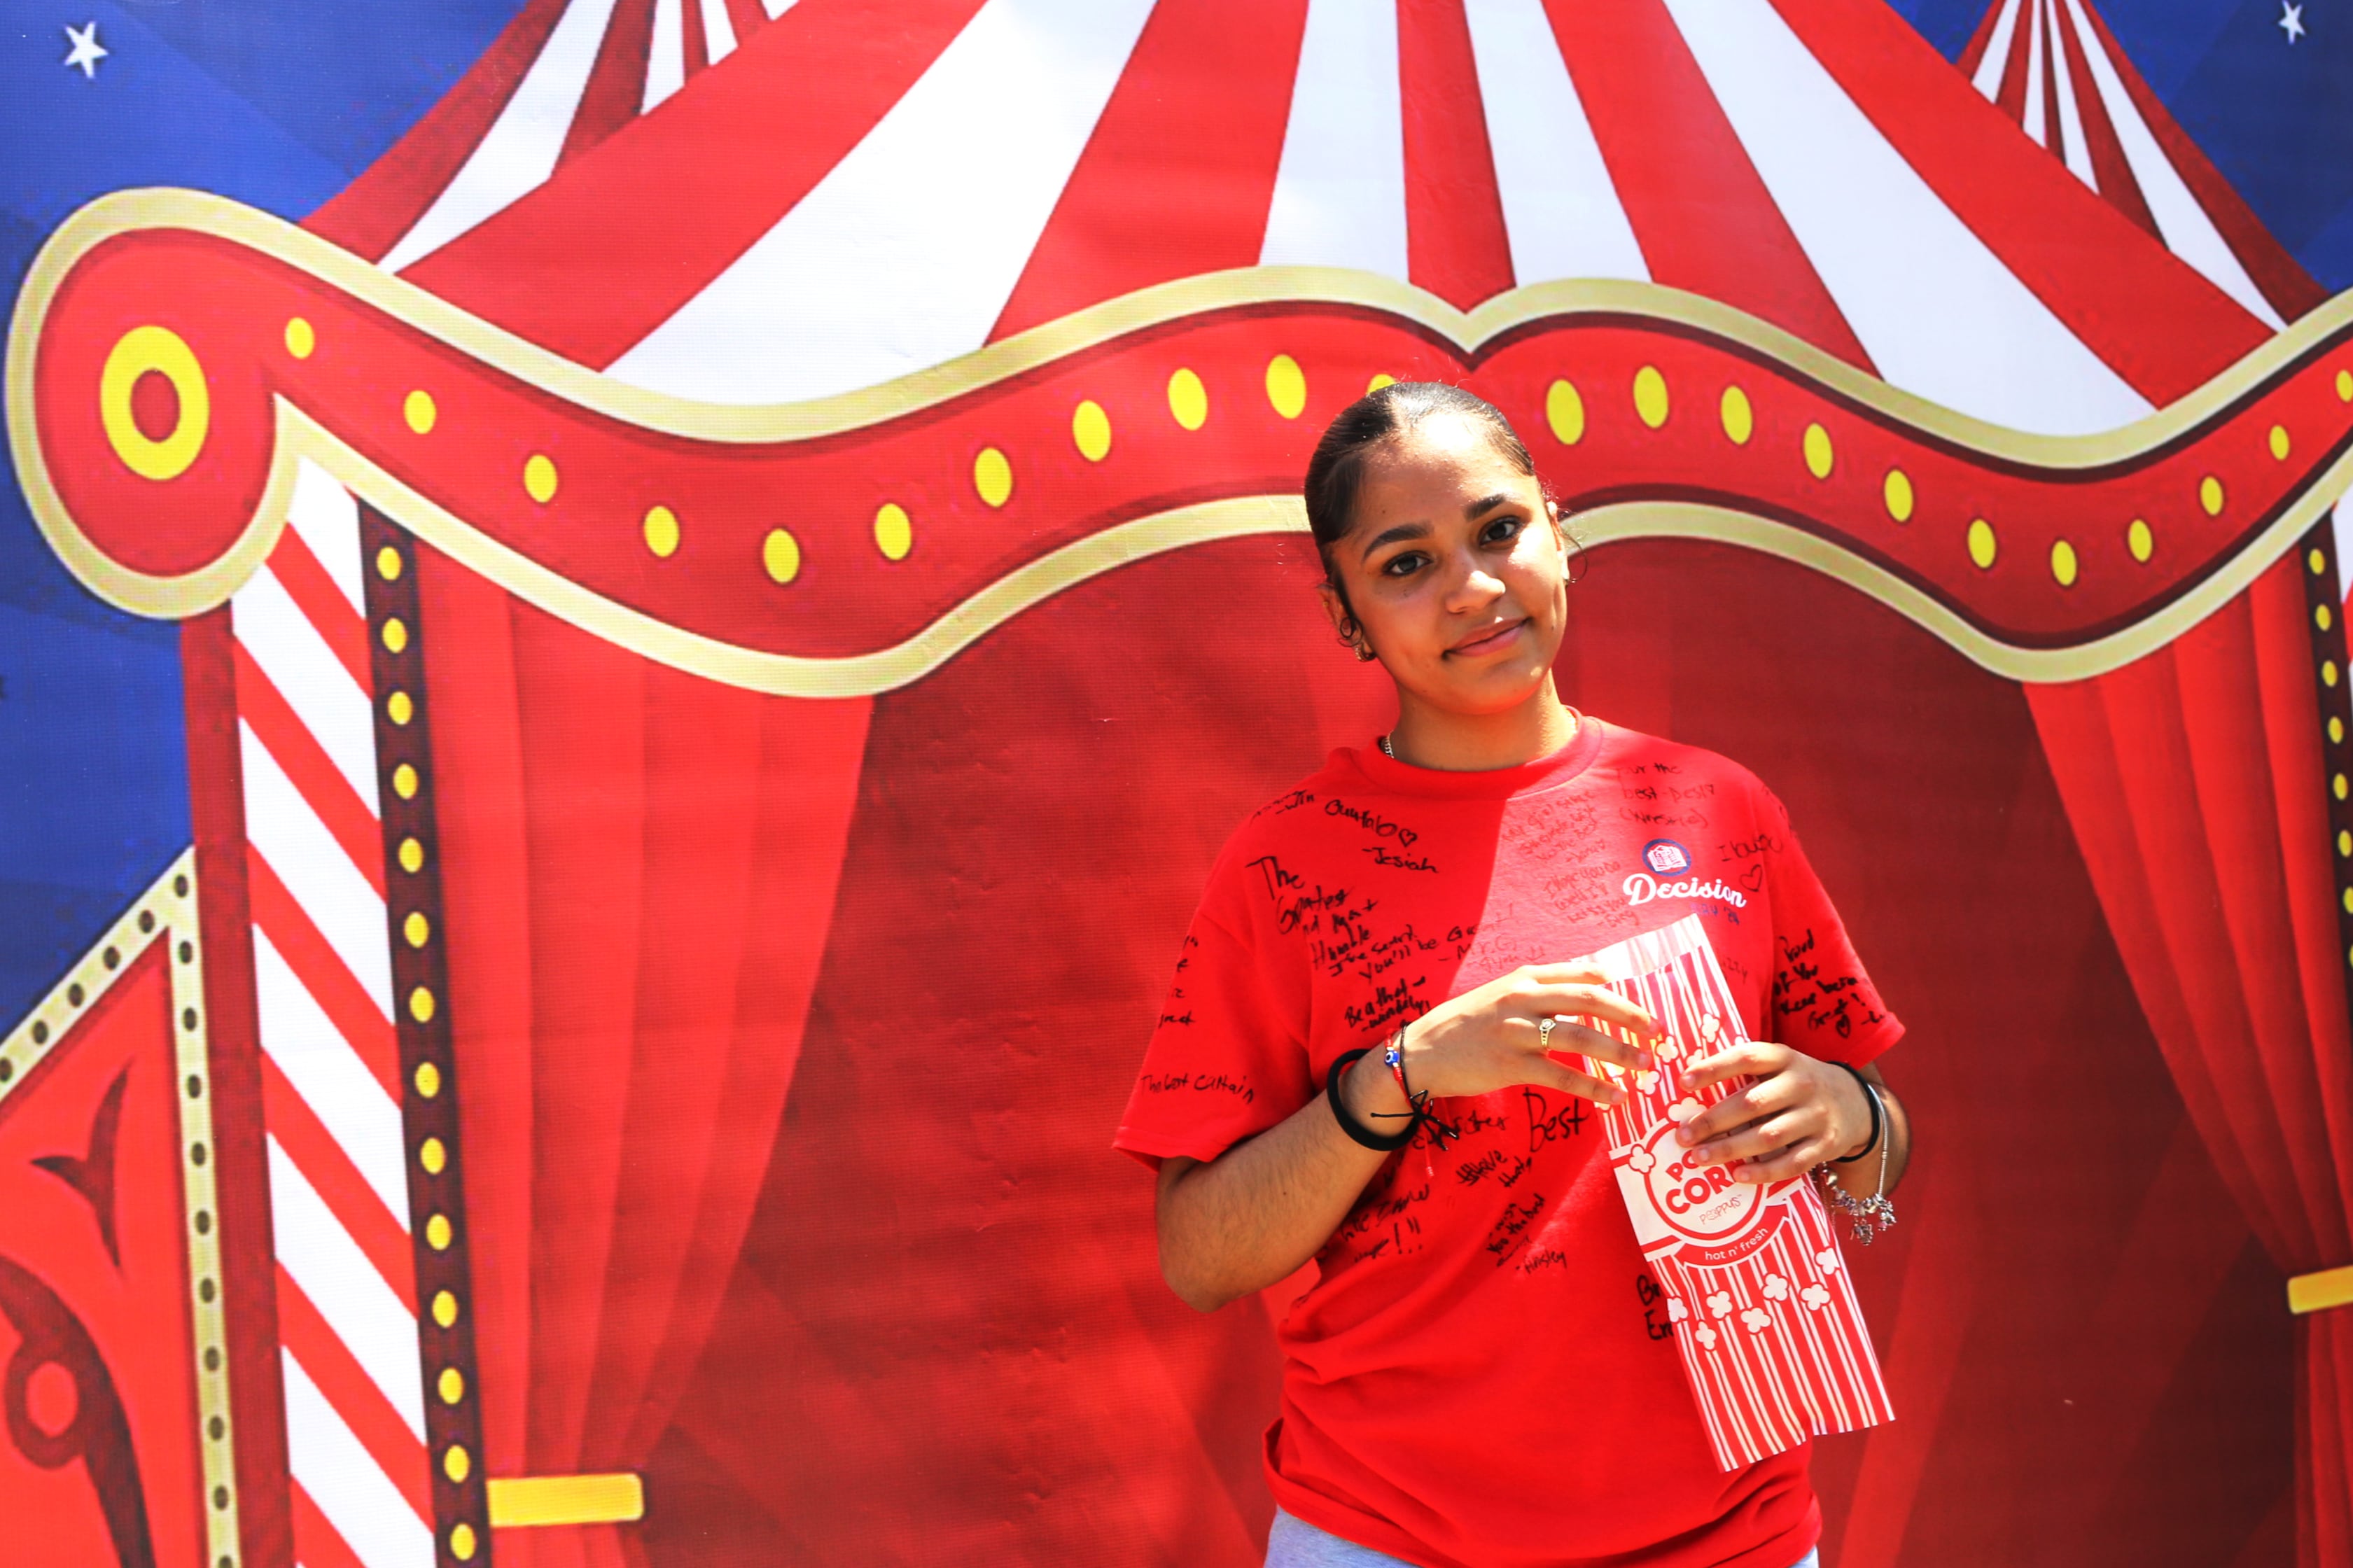 A girl wearing red holds popcorn in front of a circus-themed backdrop.